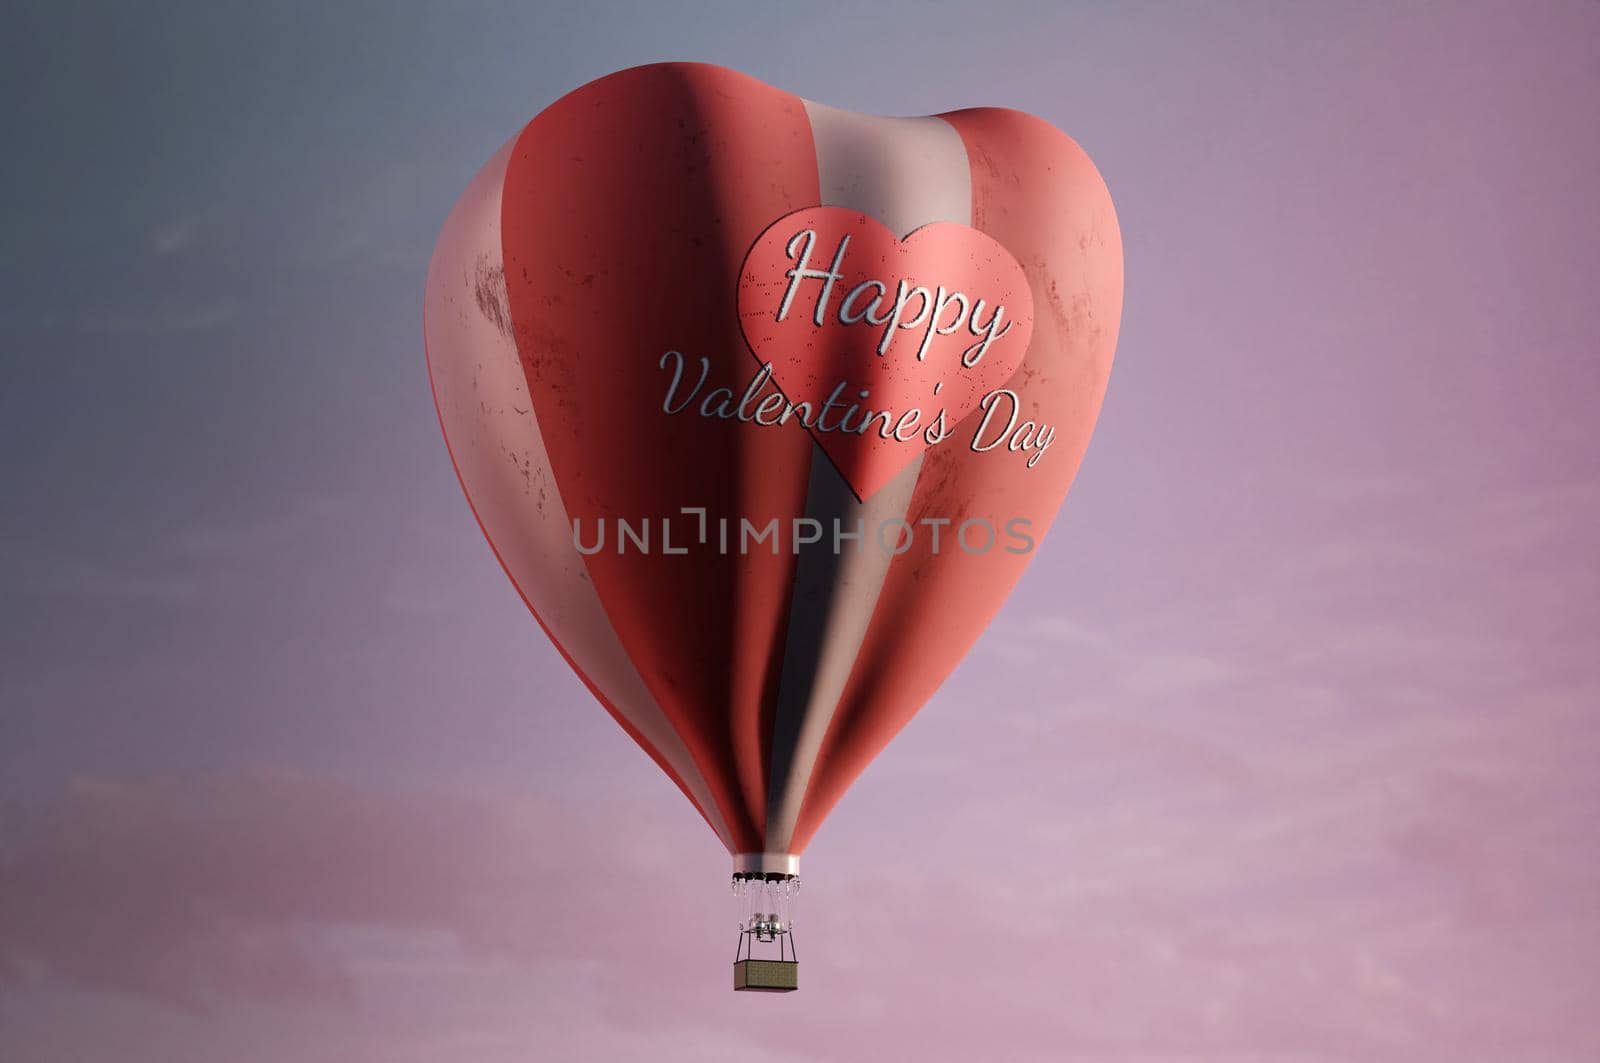 3d illustration. Happy Valentine's Day greeting card with heart shape hot air balloon by Hepjam